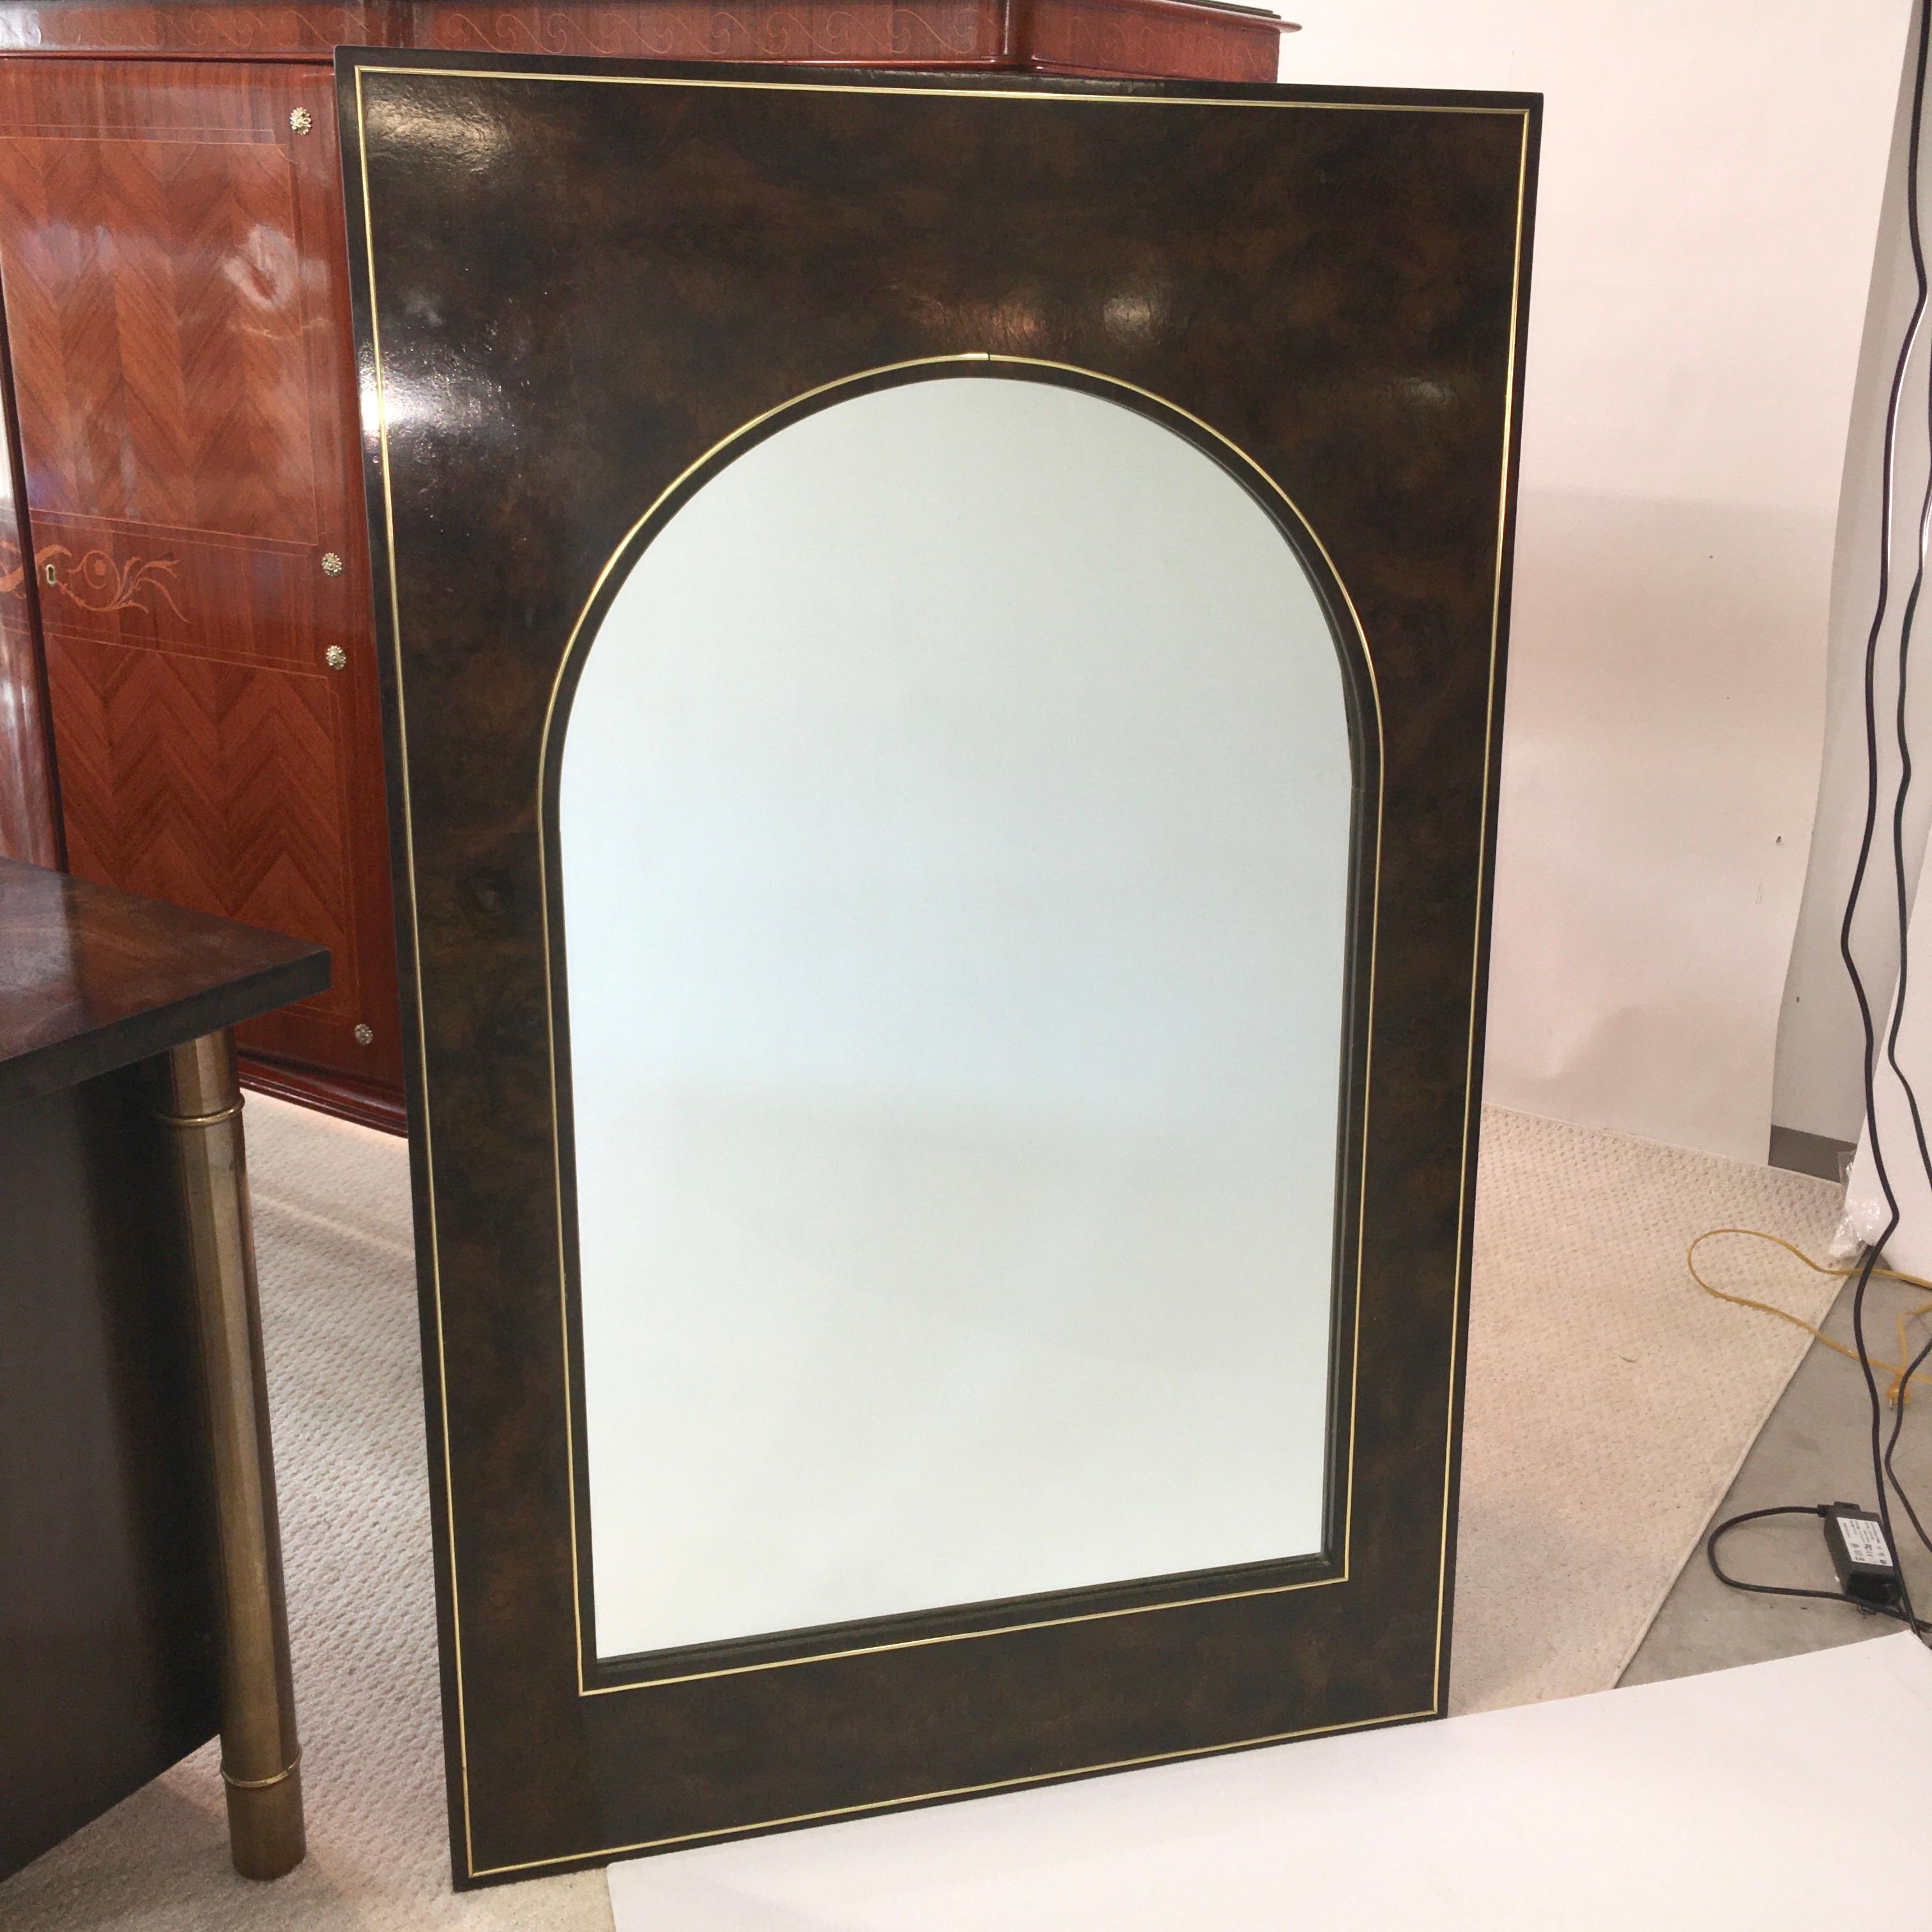 Futurist Arch Form Mirror in Carpathian Elm and Brass by Mastercraft In Good Condition For Sale In Hanover, MA